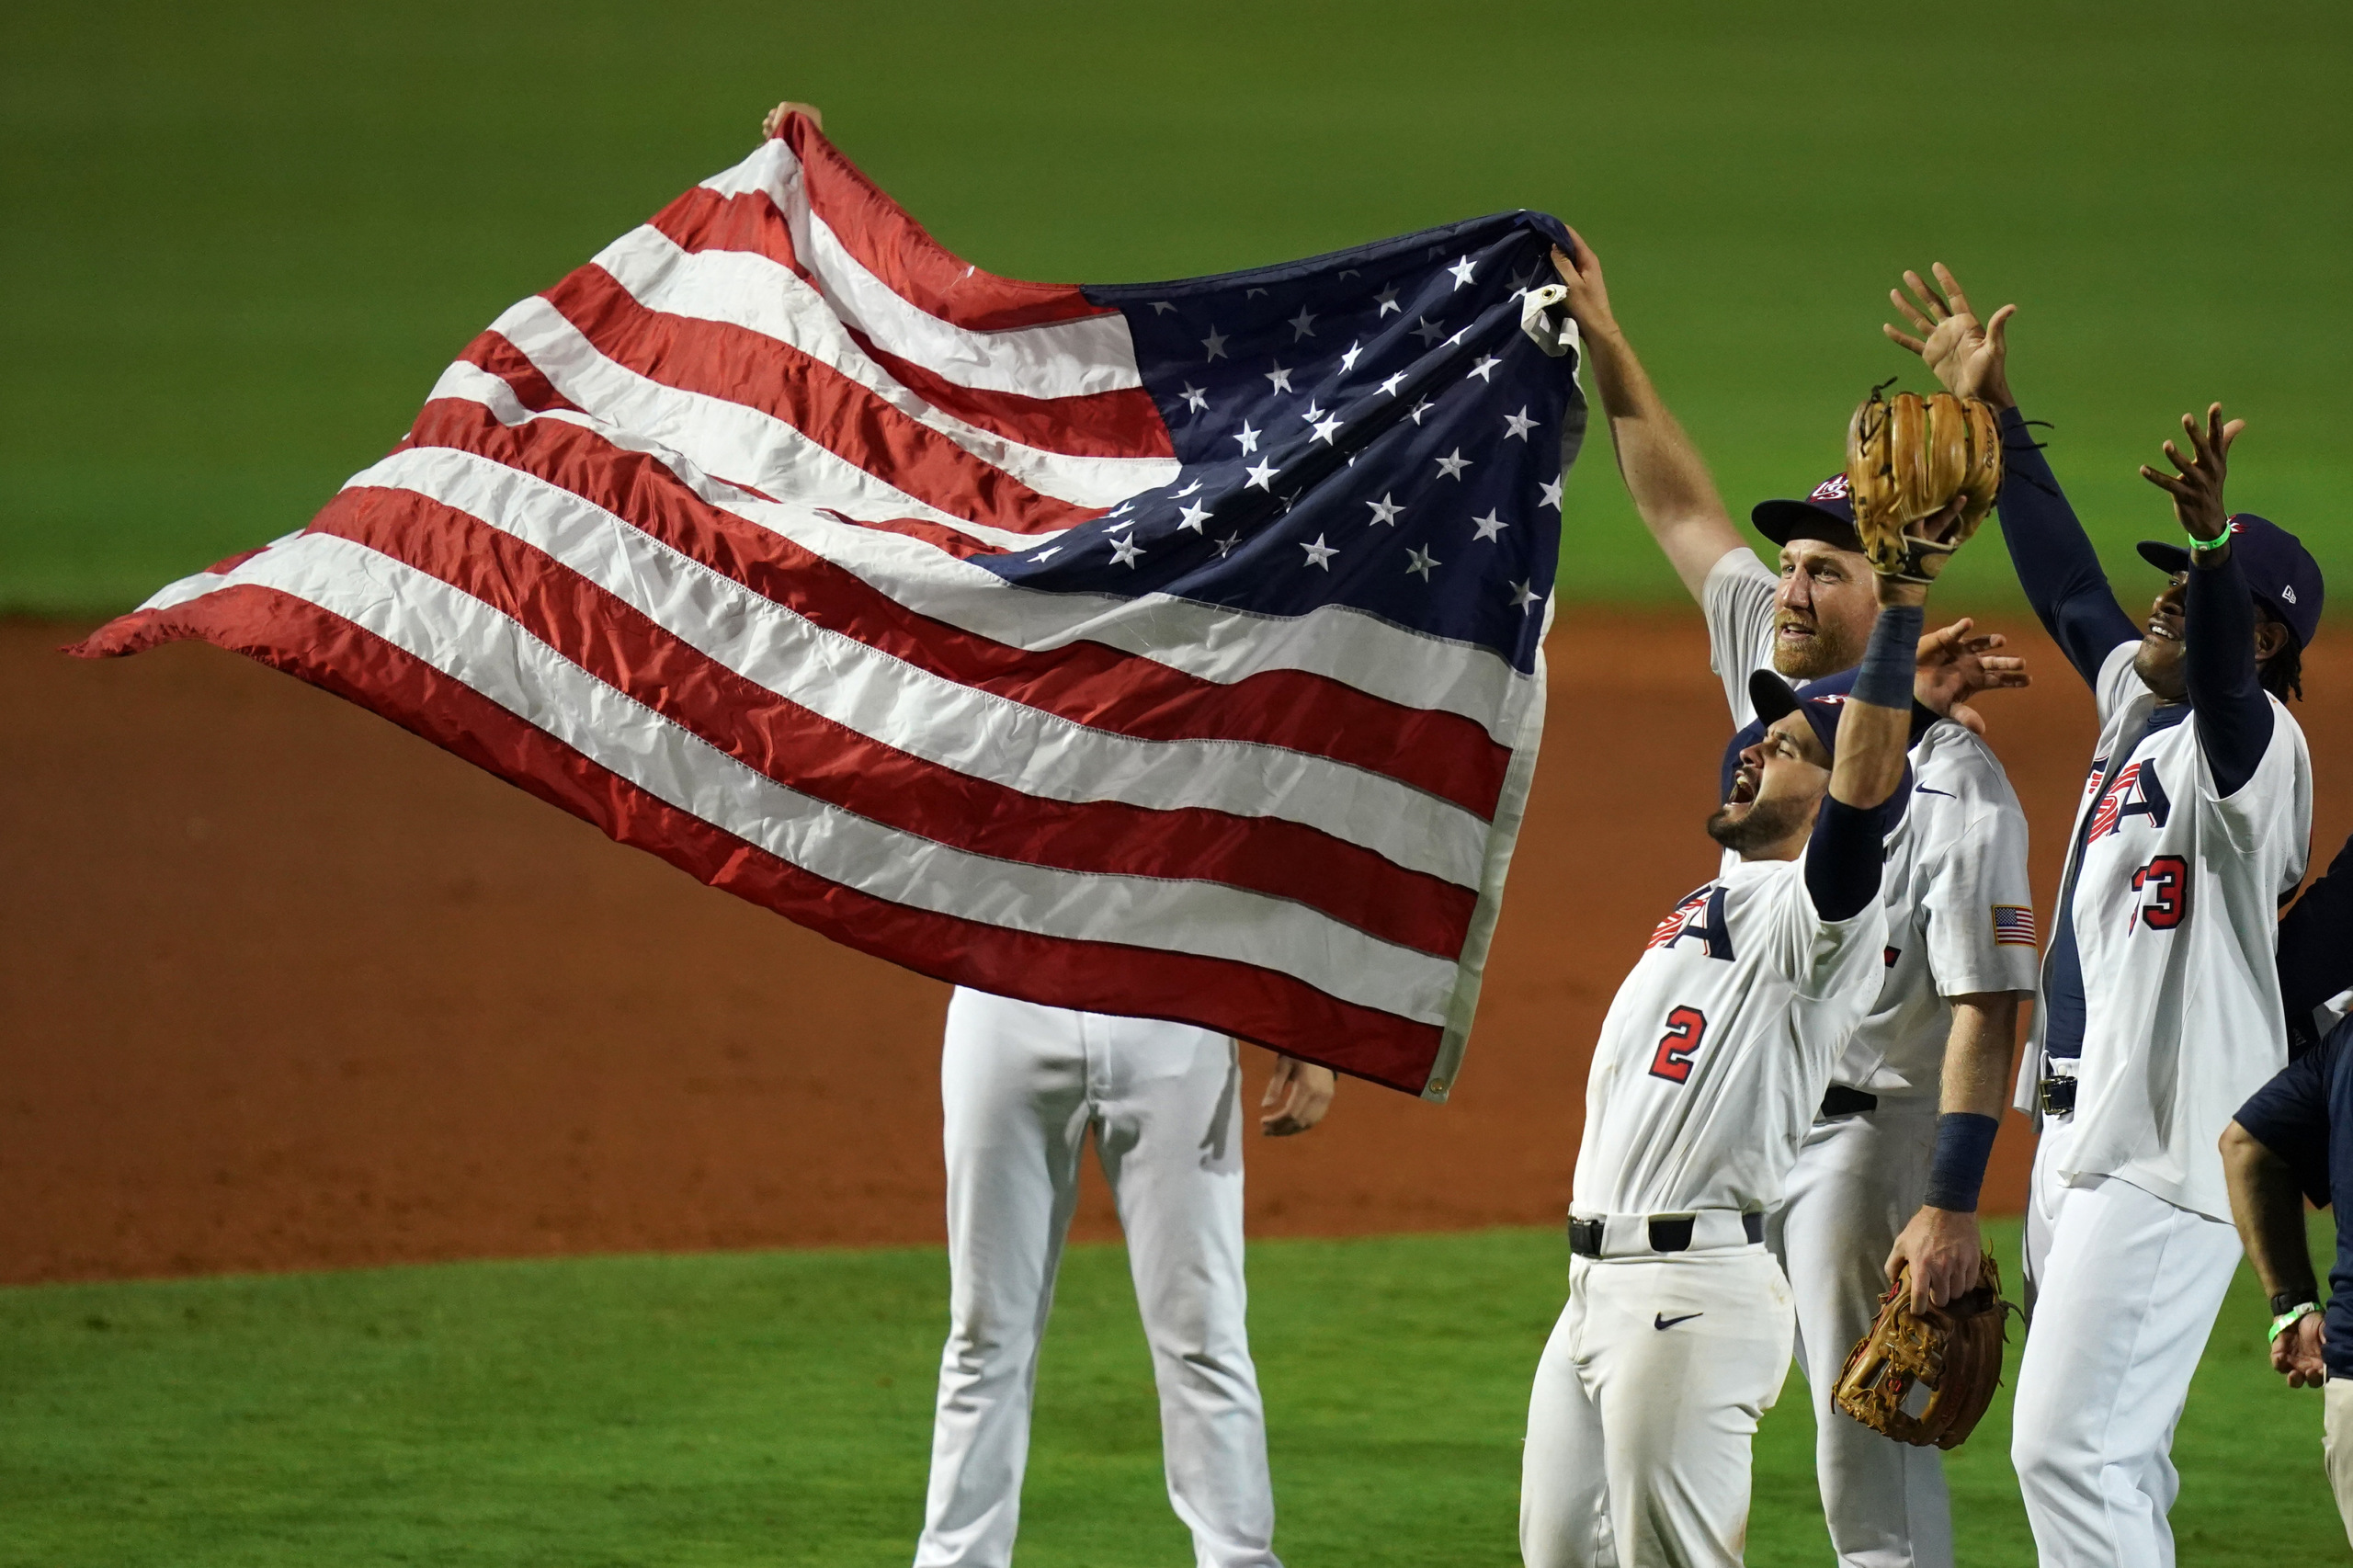 Baseball returns to the Olympics: Team USA ready for Tokyo 2020 qualifier